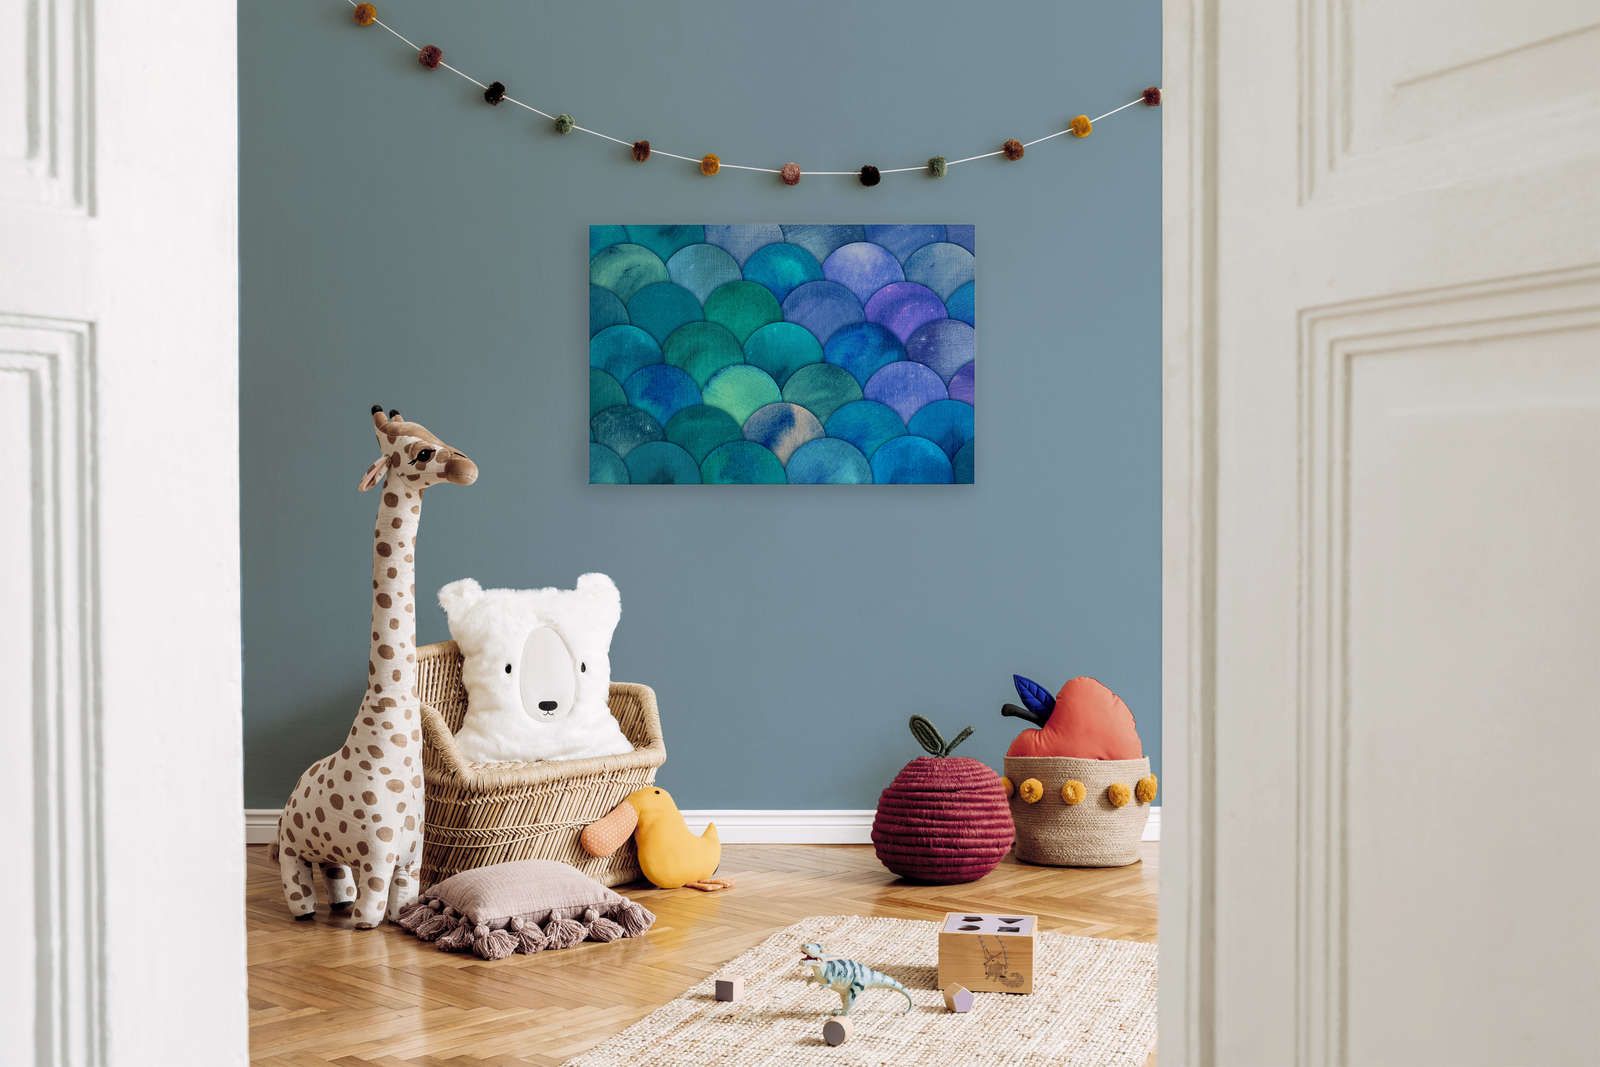             Canvas with fish scale pattern - 90 cm x 60 cm
        